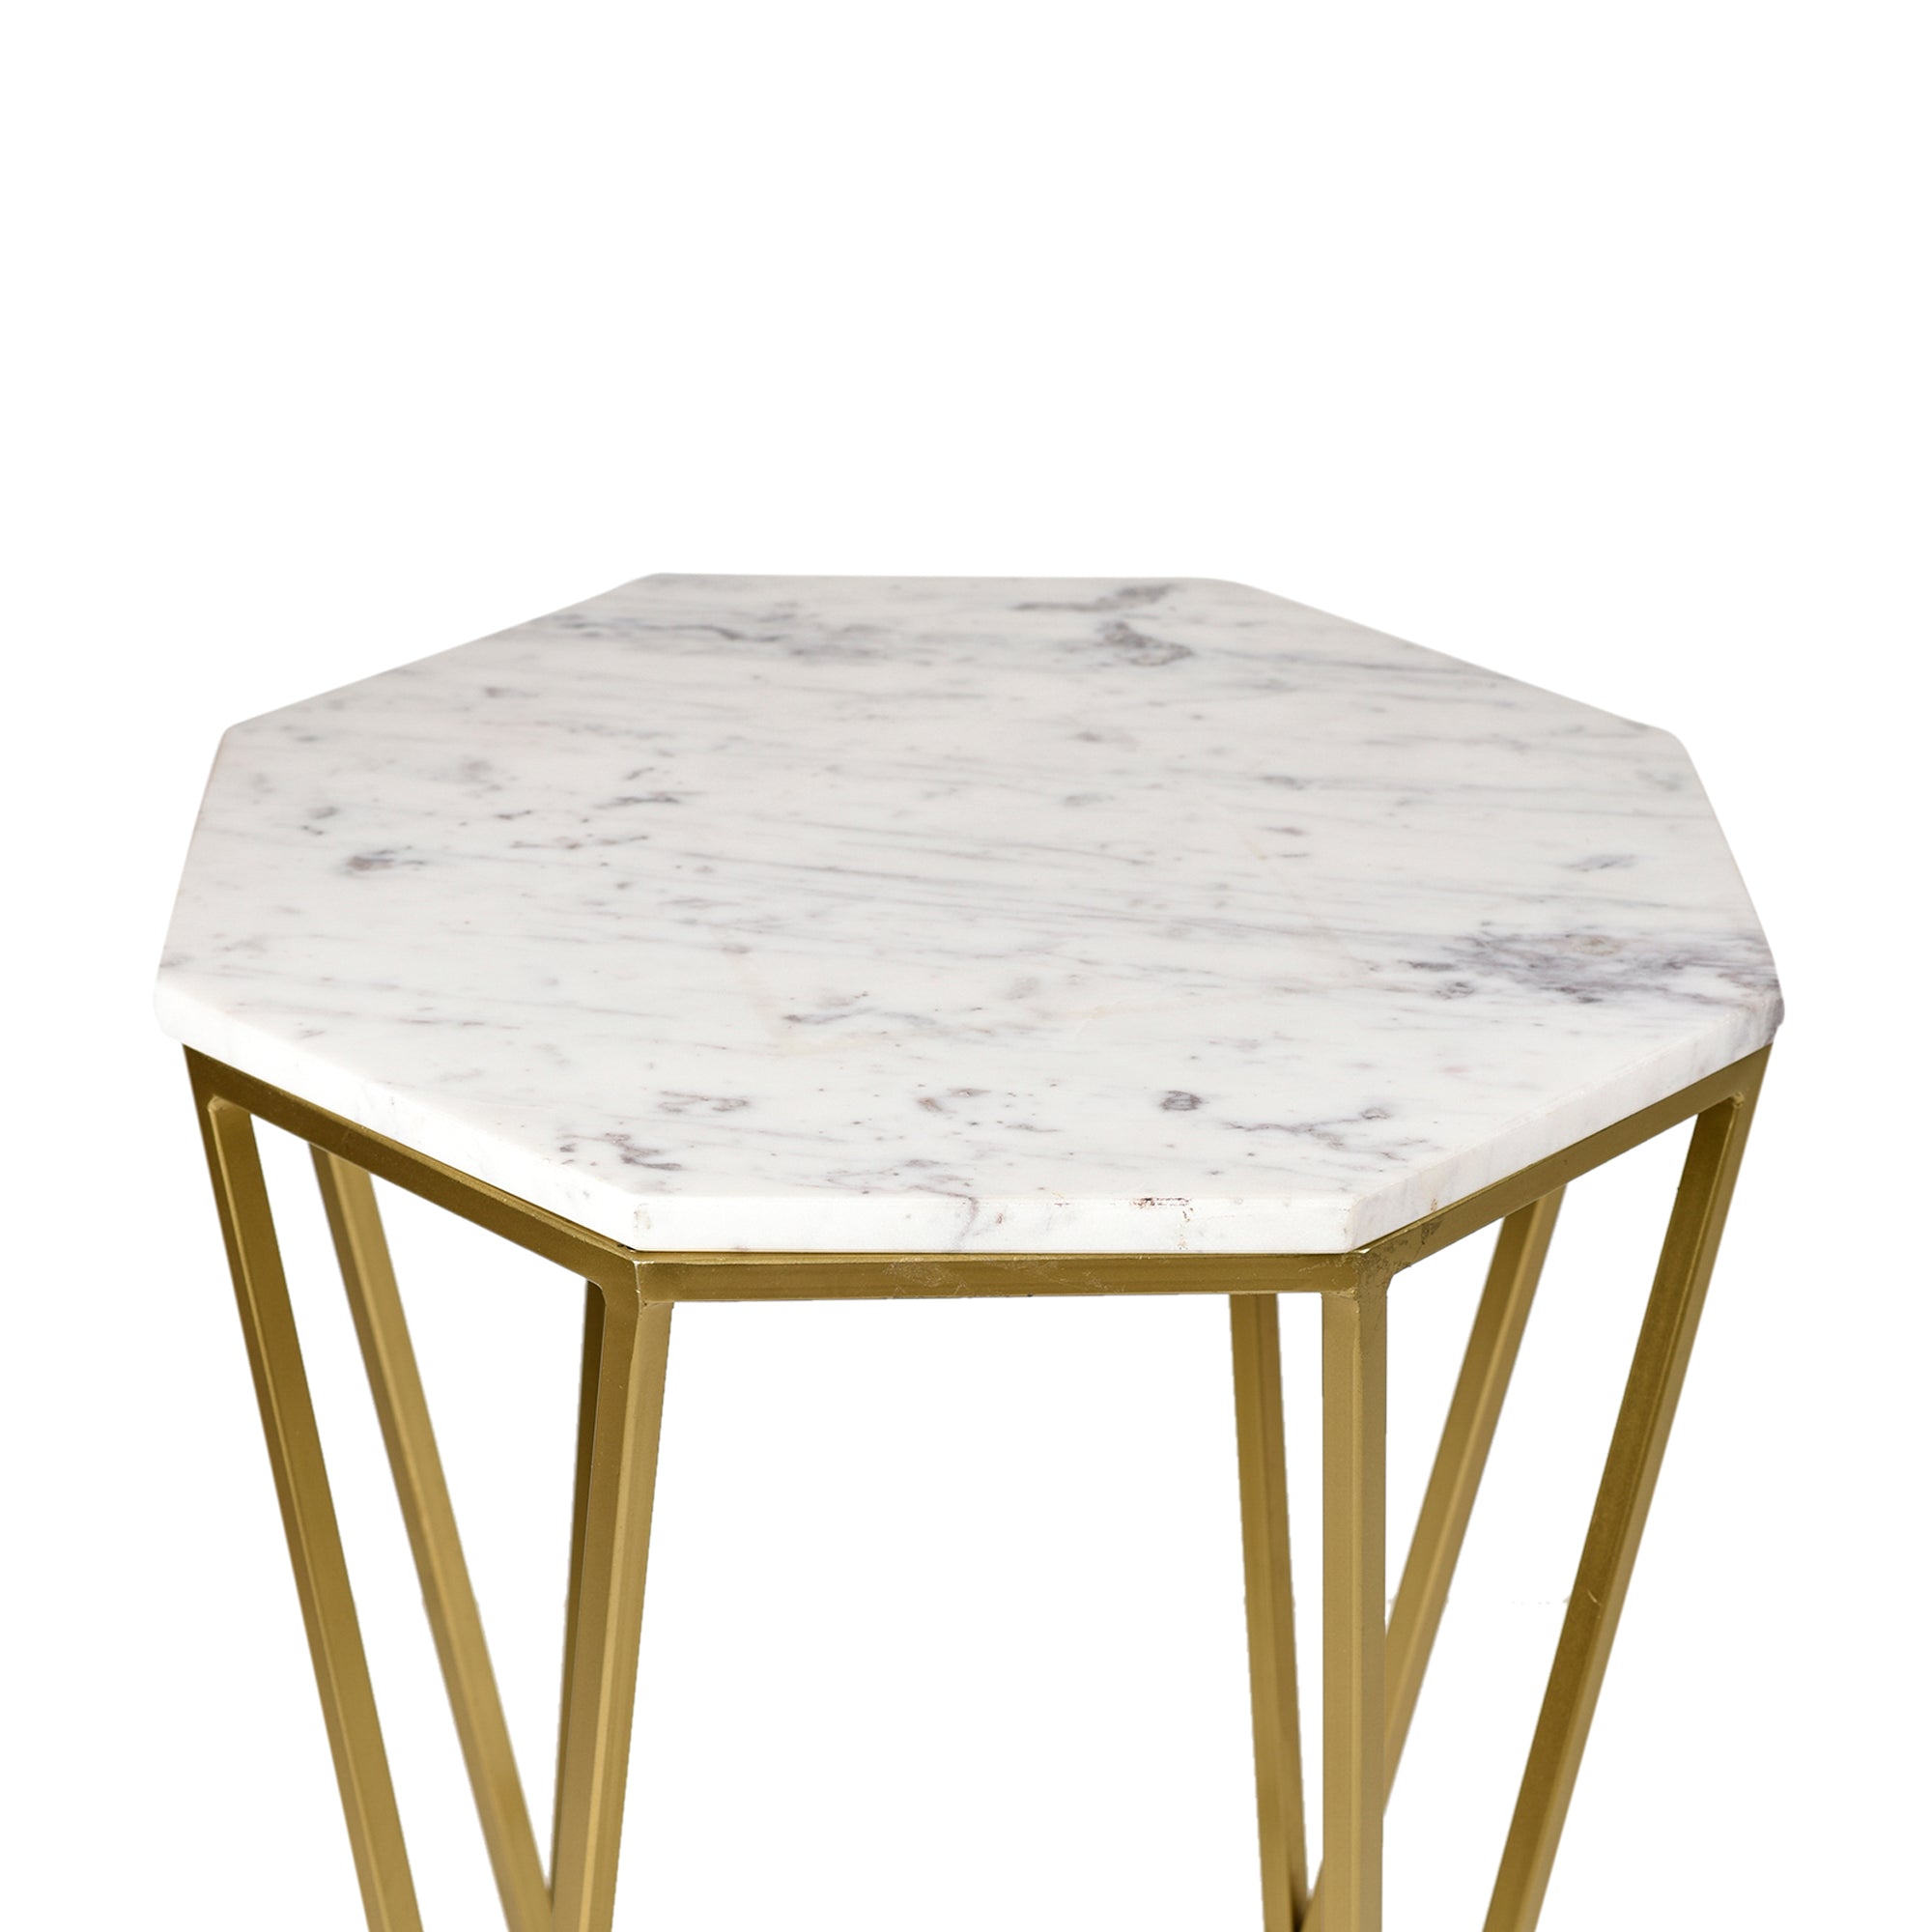 Signum Marble Hexagon Shaped End Accent Table 17x17x19 inches